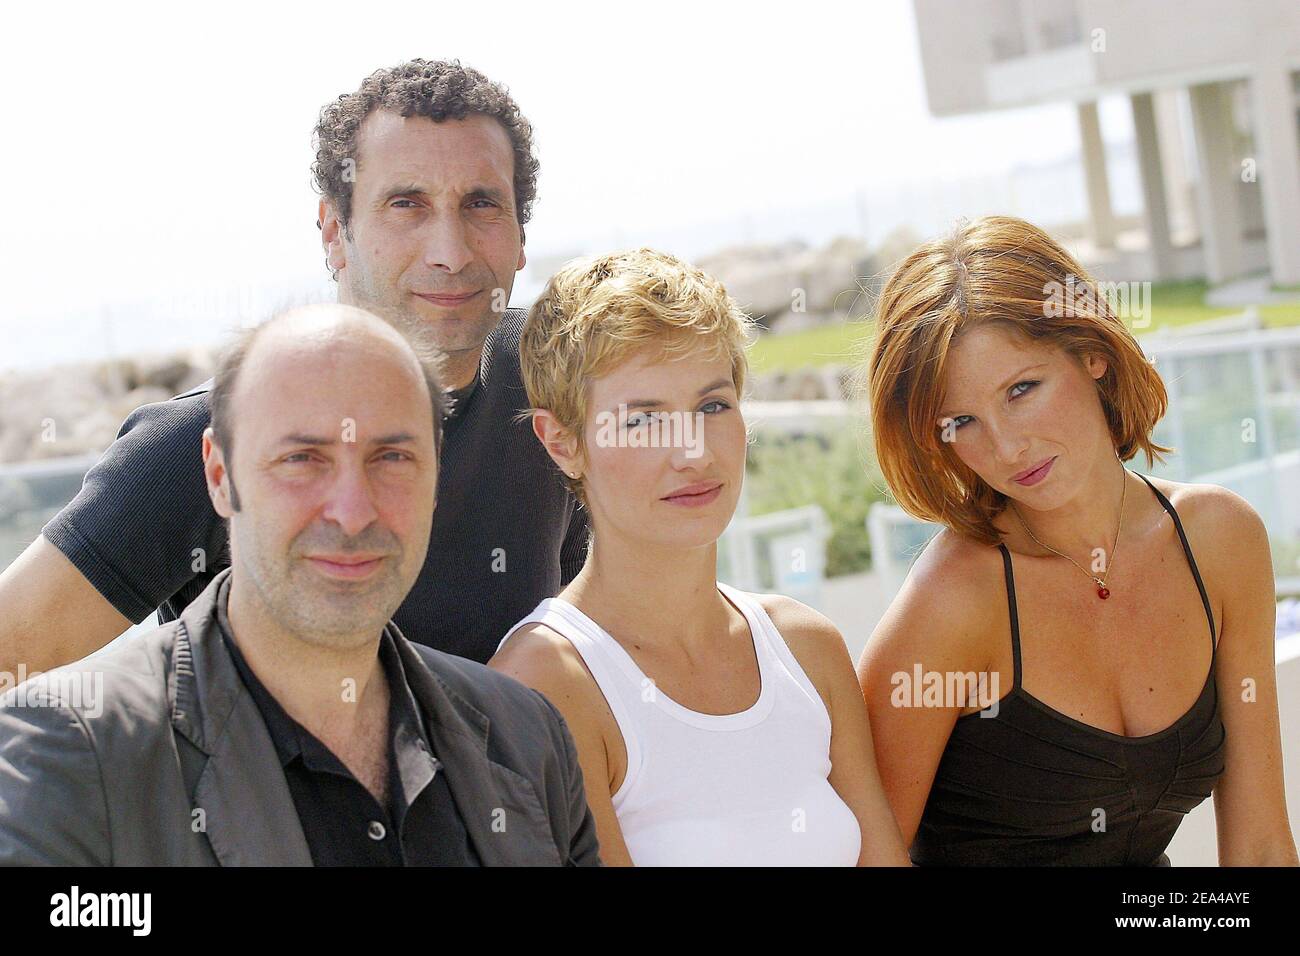 French director Cedric Klapisch (L) poses with the cast members (L-R)  Zinedine Soualem, Cecile de France and Kelly Reilly at the photocall for  his latest film, 'Les Poupees russes', held at the